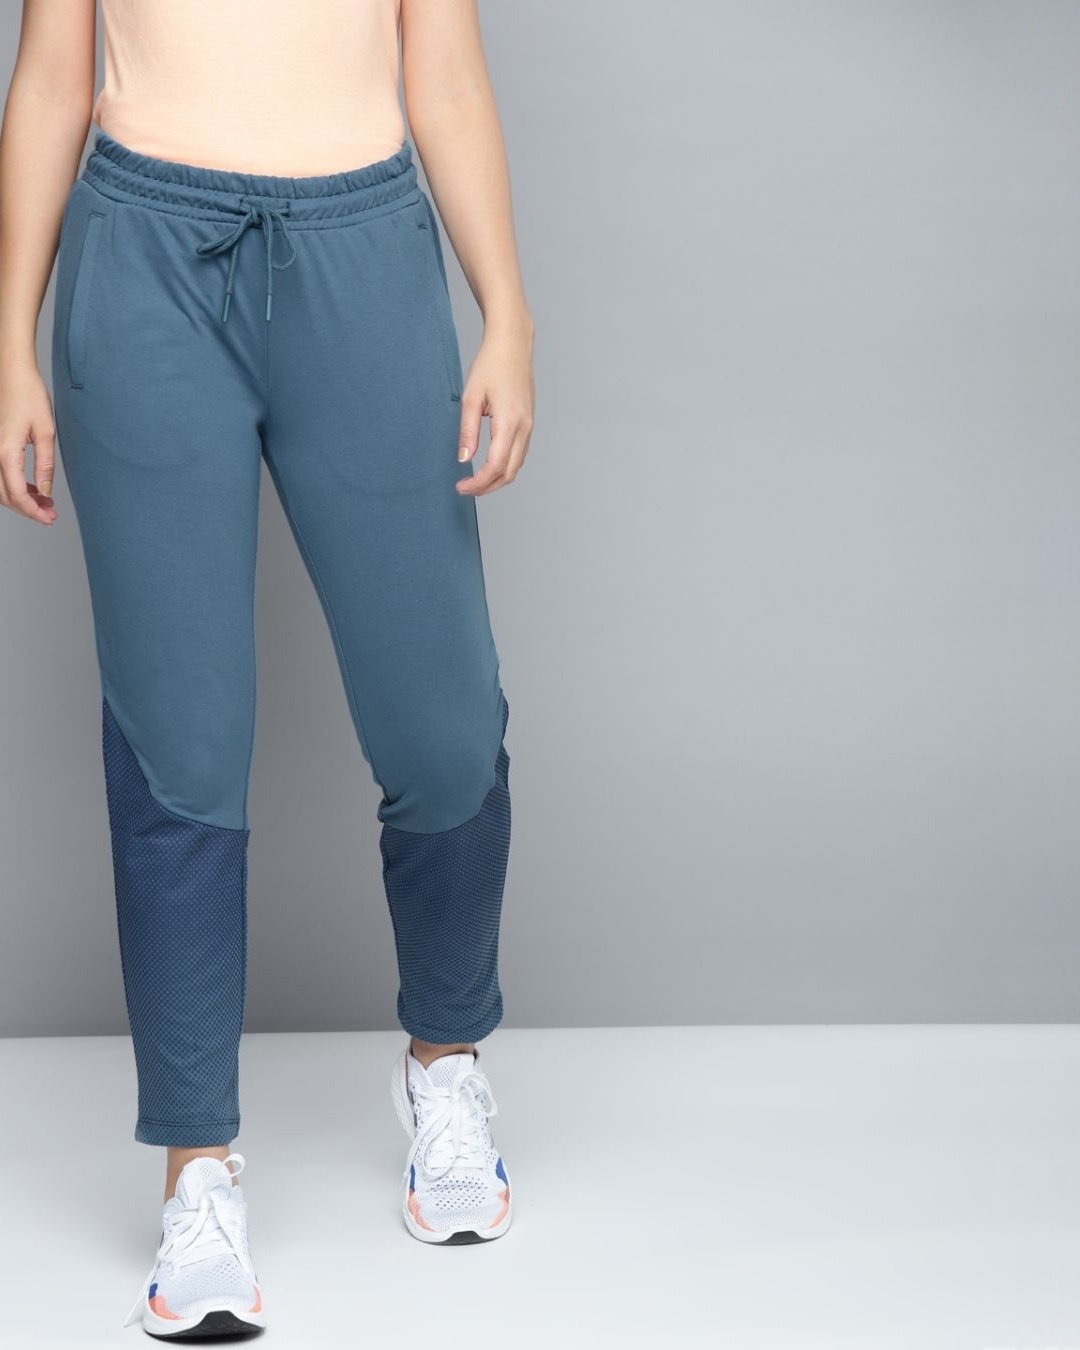 Buy VINSON Girl's Plain Casual Black Joggers and Relaxed Fit Denim Light  Blue Jogger Pant Sports Track Pants (Pack of 02)-(30) at Amazon.in